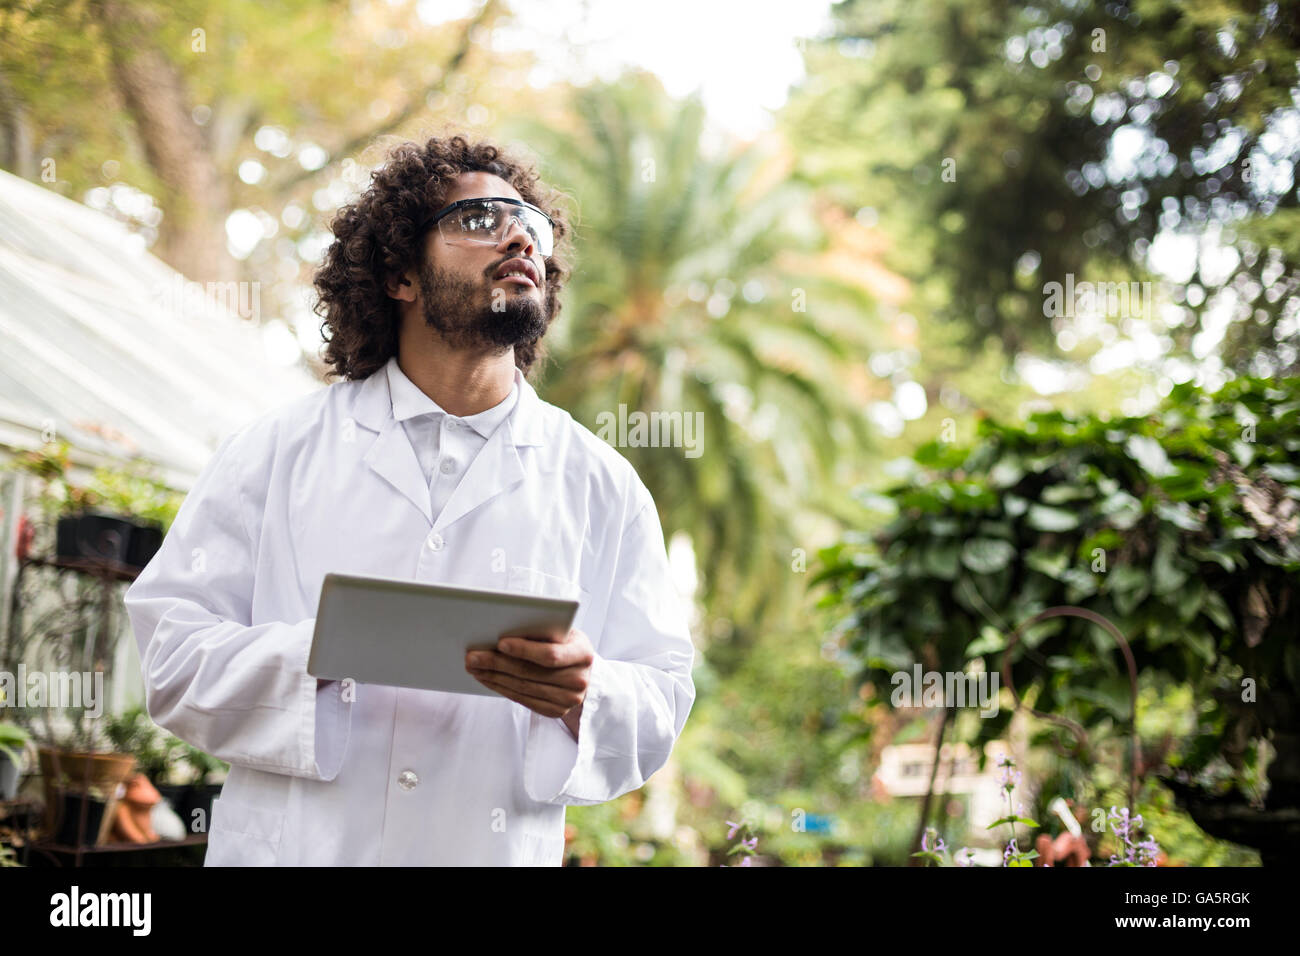 Male scientist inspecting plants at greenhouse Stock Photo